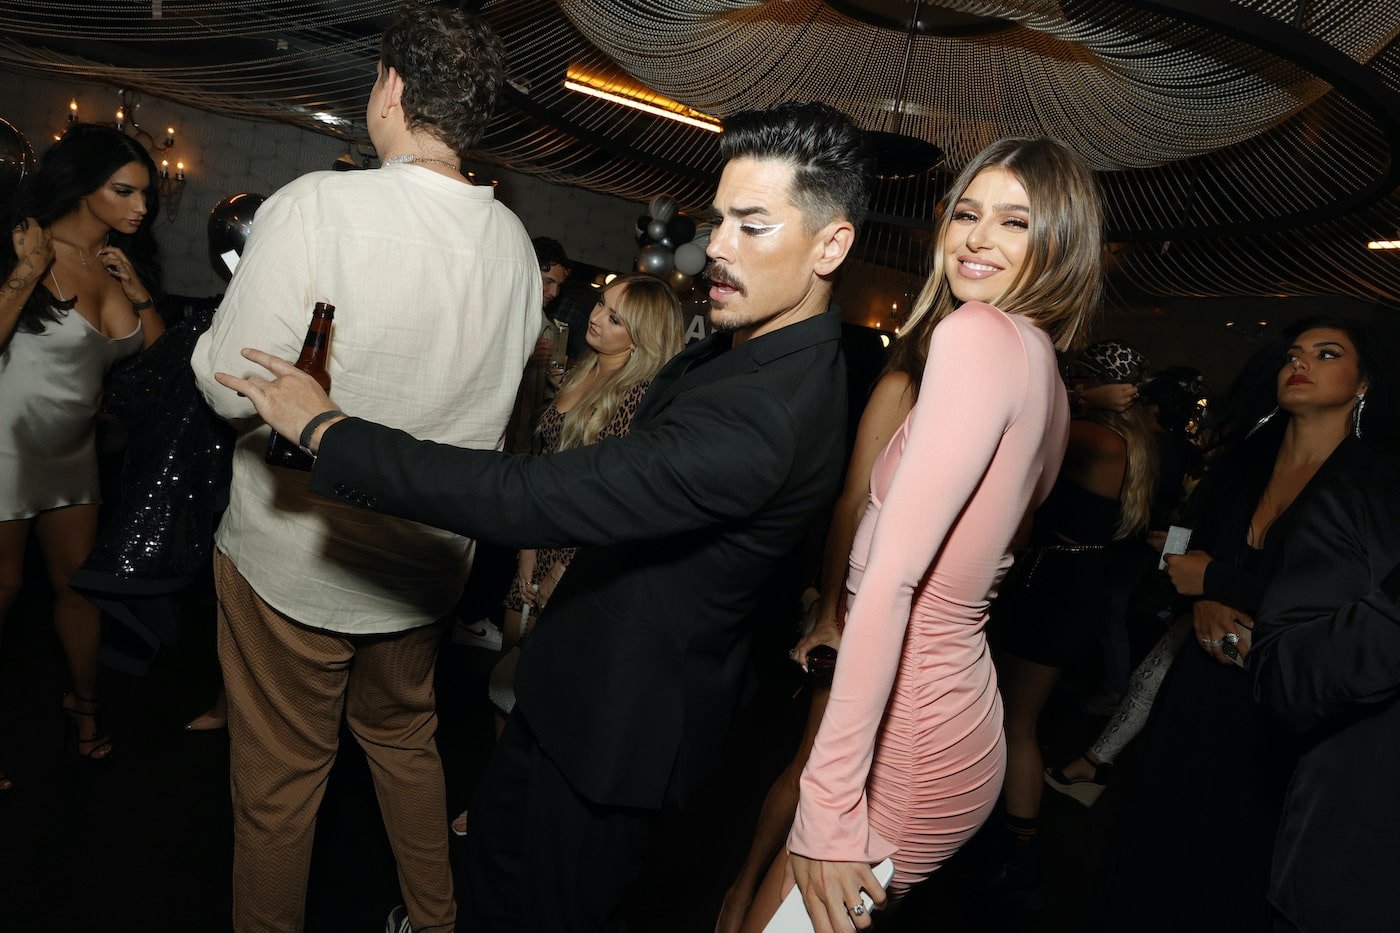 Tom Sandoval and Raquel Leviss from 'Vanderpump Rules' dance at a party